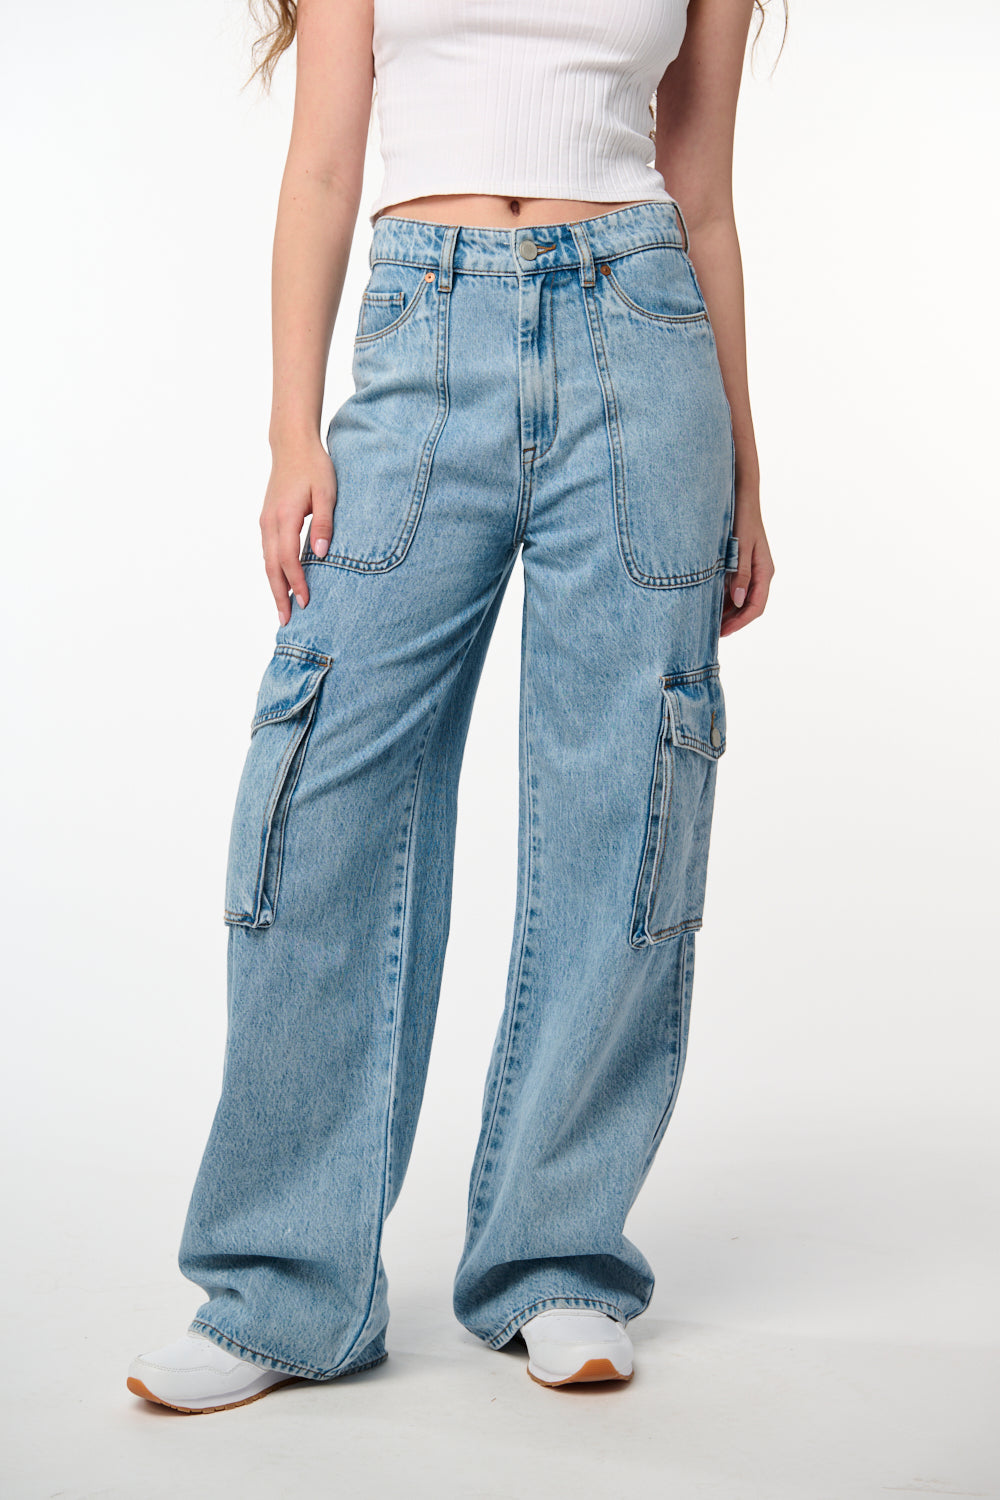 The Franklin In All Heart Pant